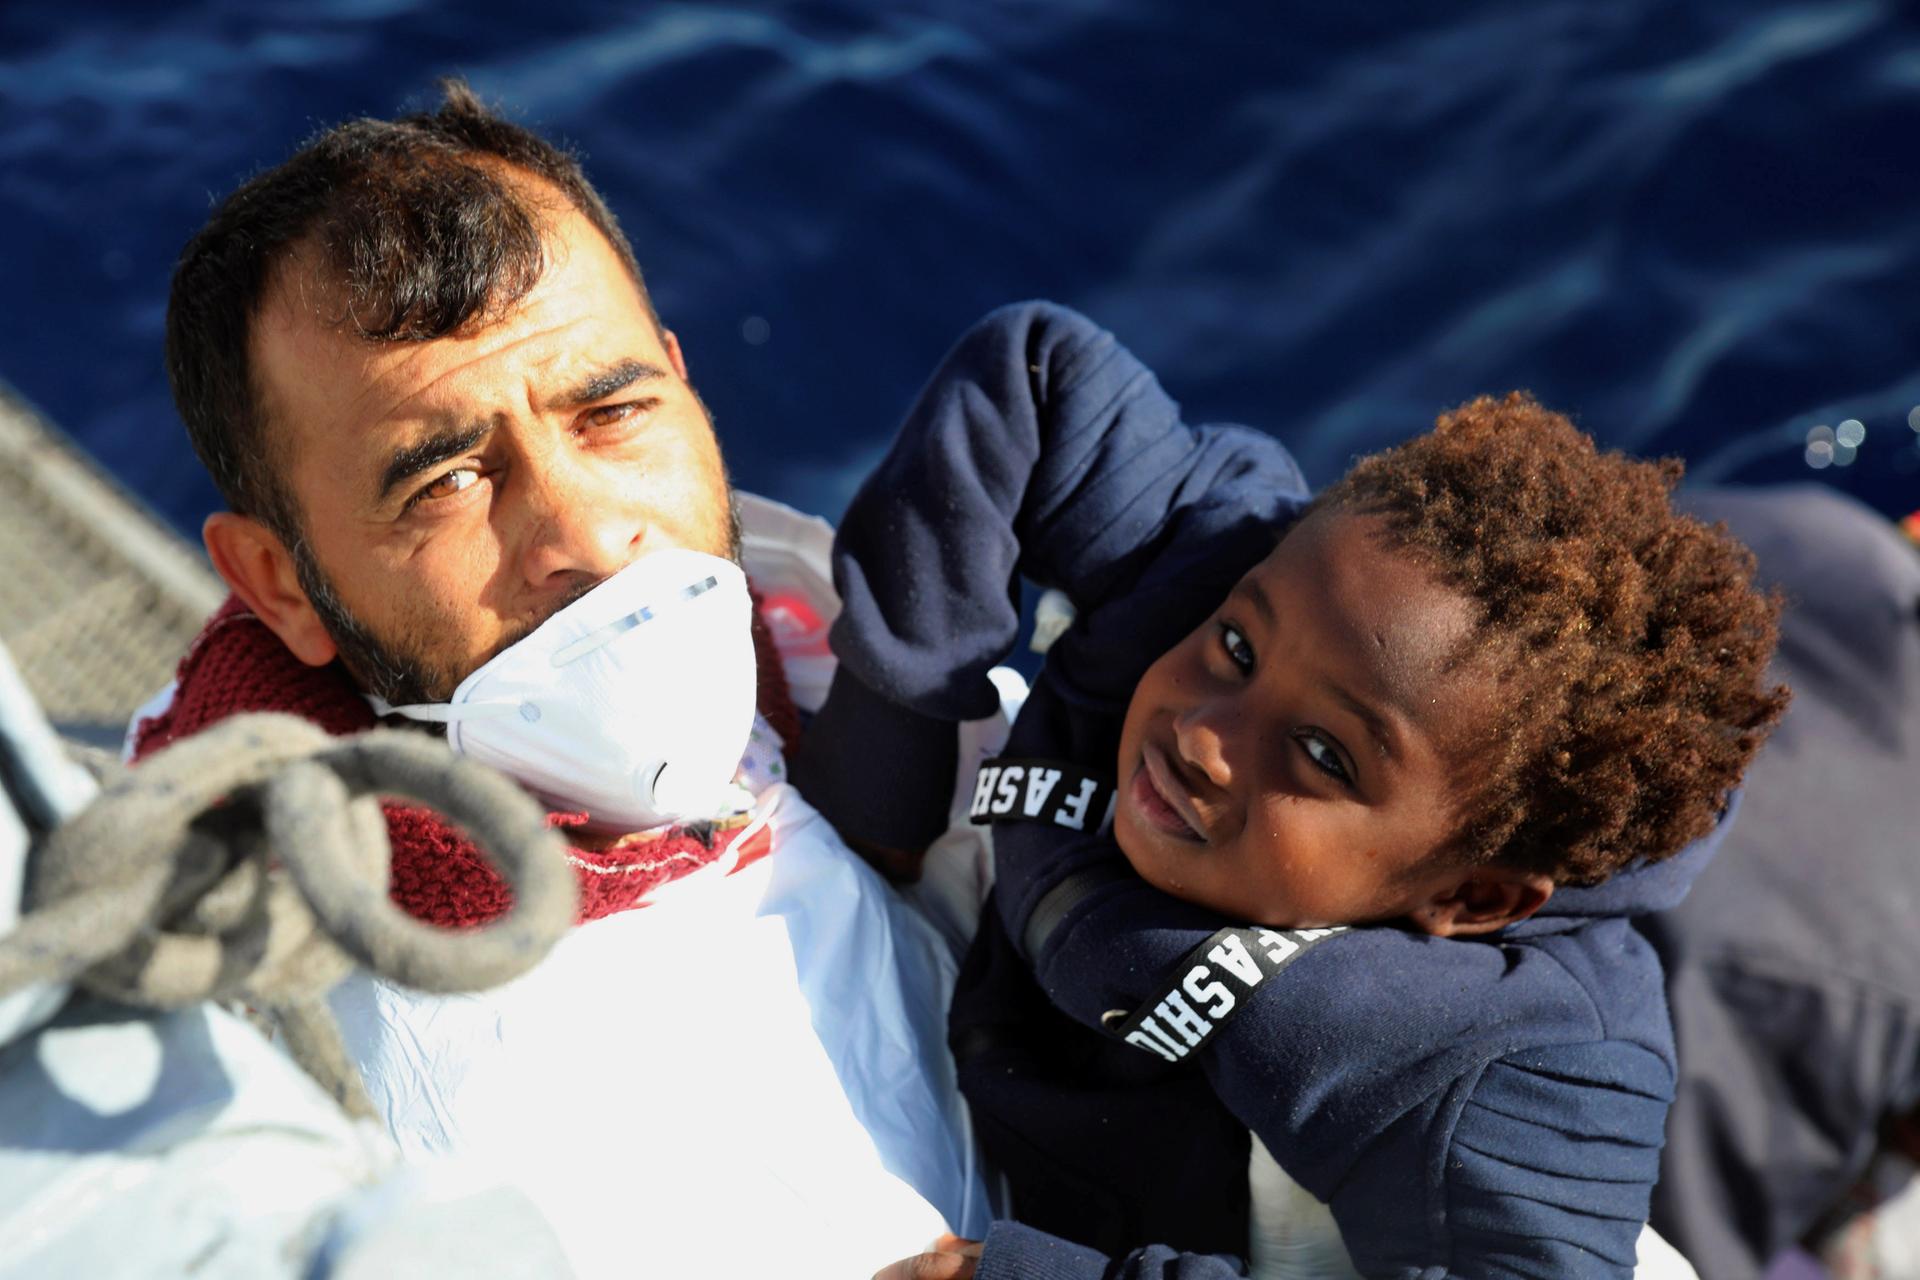 Man on a boat lifting a young child to hand to rescuers